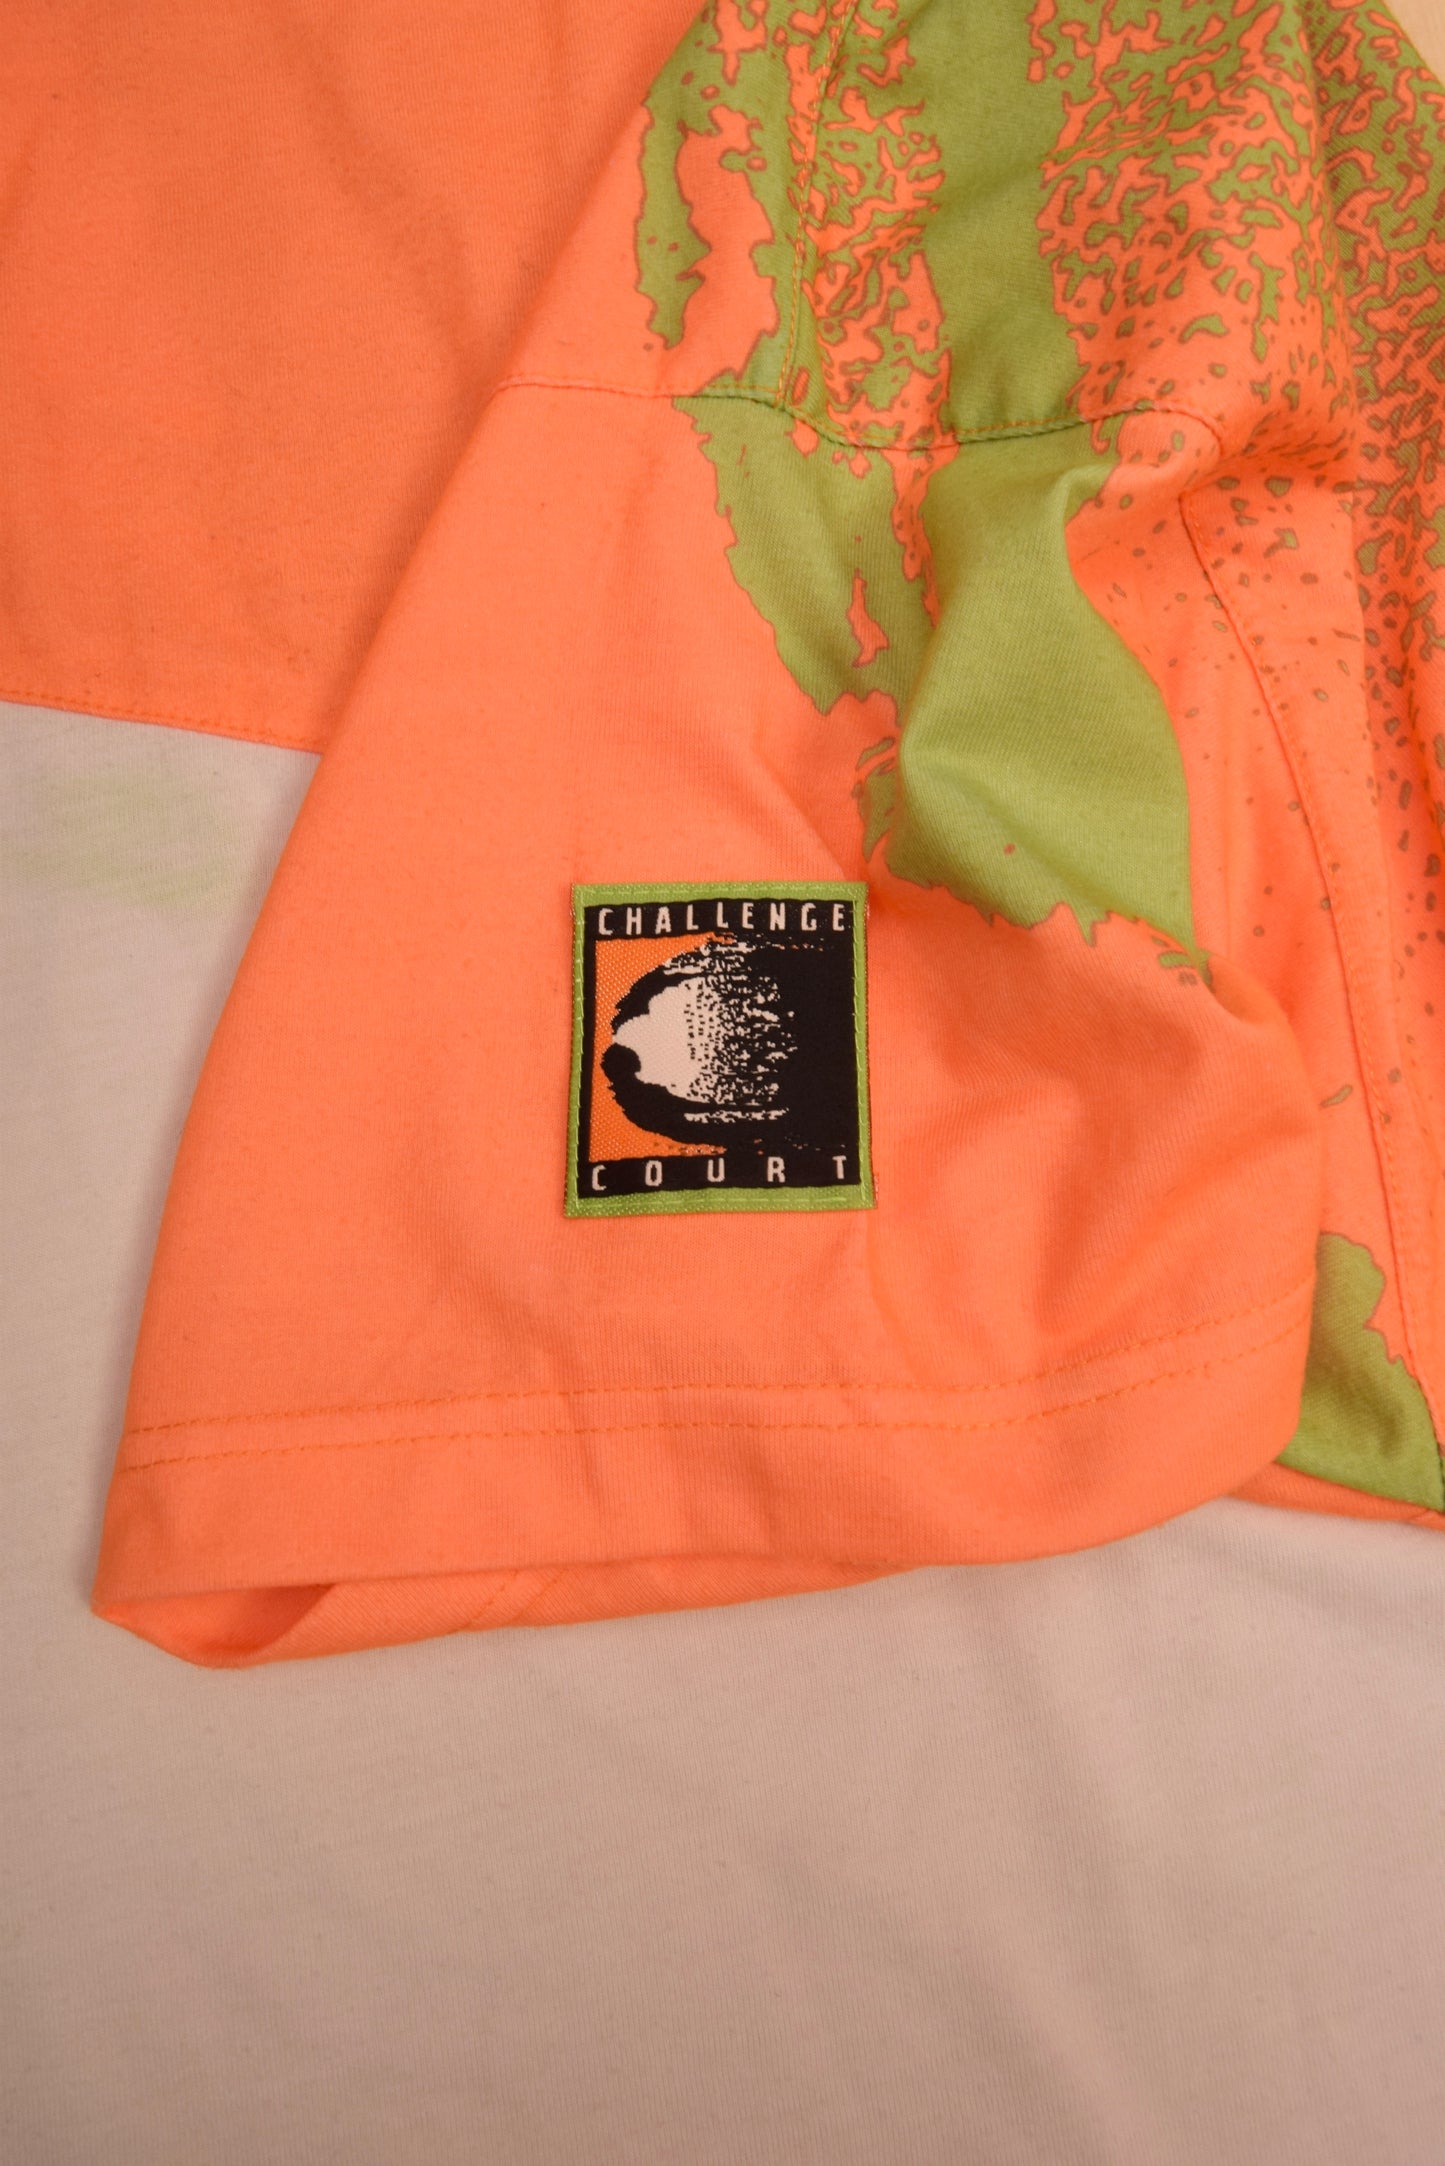 Vintage 90's Nike Challenge Court Tennis Boxy Zip Polo Shirt Size L Green Orange Blue Made in Italy Andre Agassi